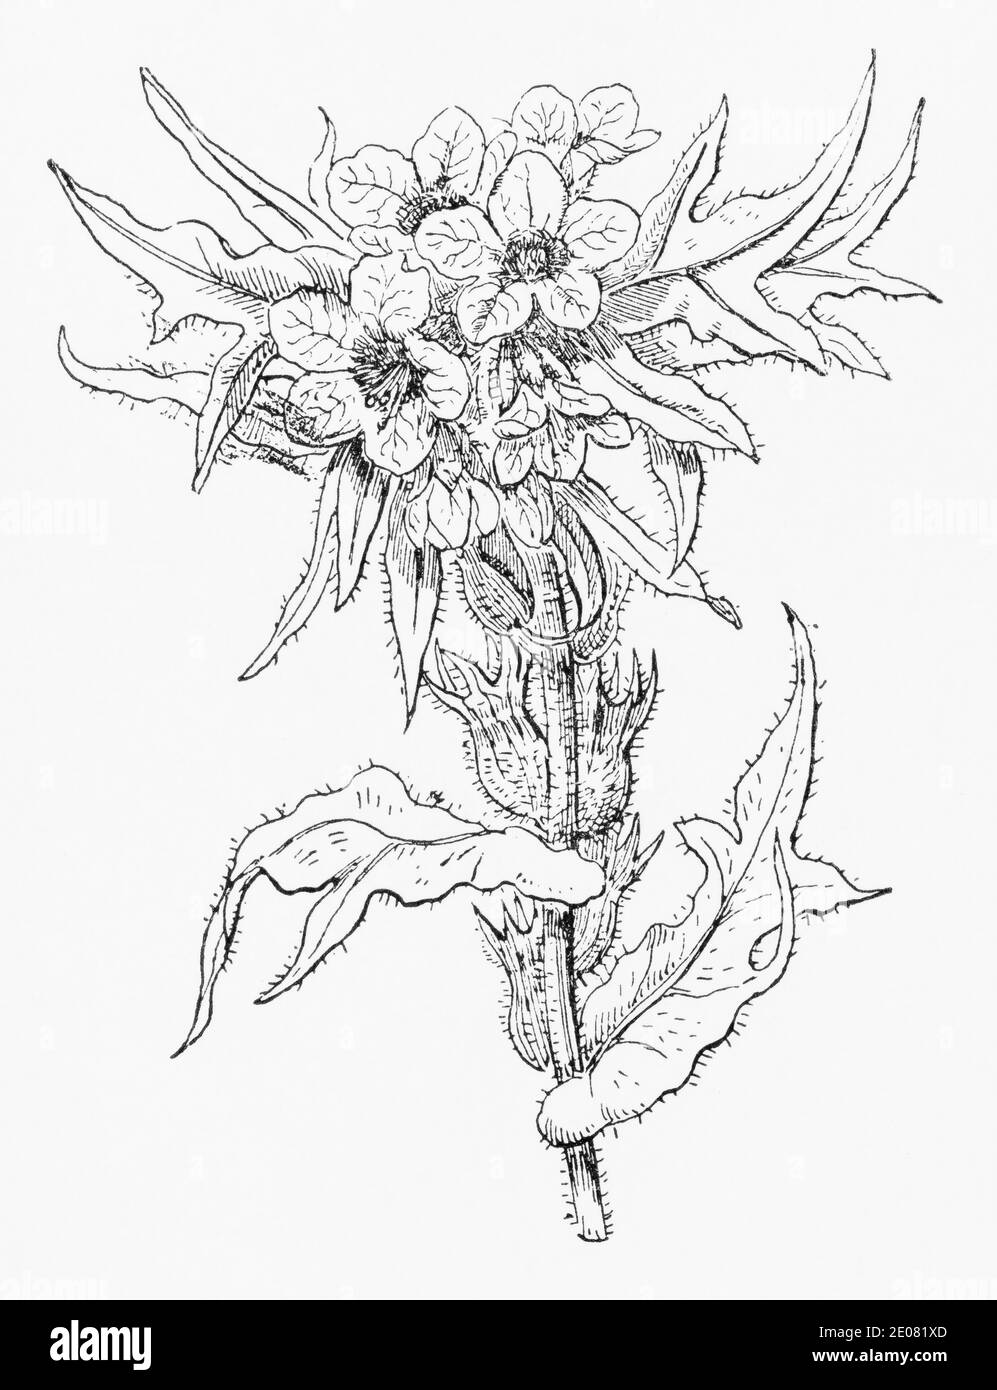 Old botanical illustration engraving of Henbane / Hyoscyamus niger. Traditional medicinal herbal plant, but deadly poisonous. See Notes Stock Photo